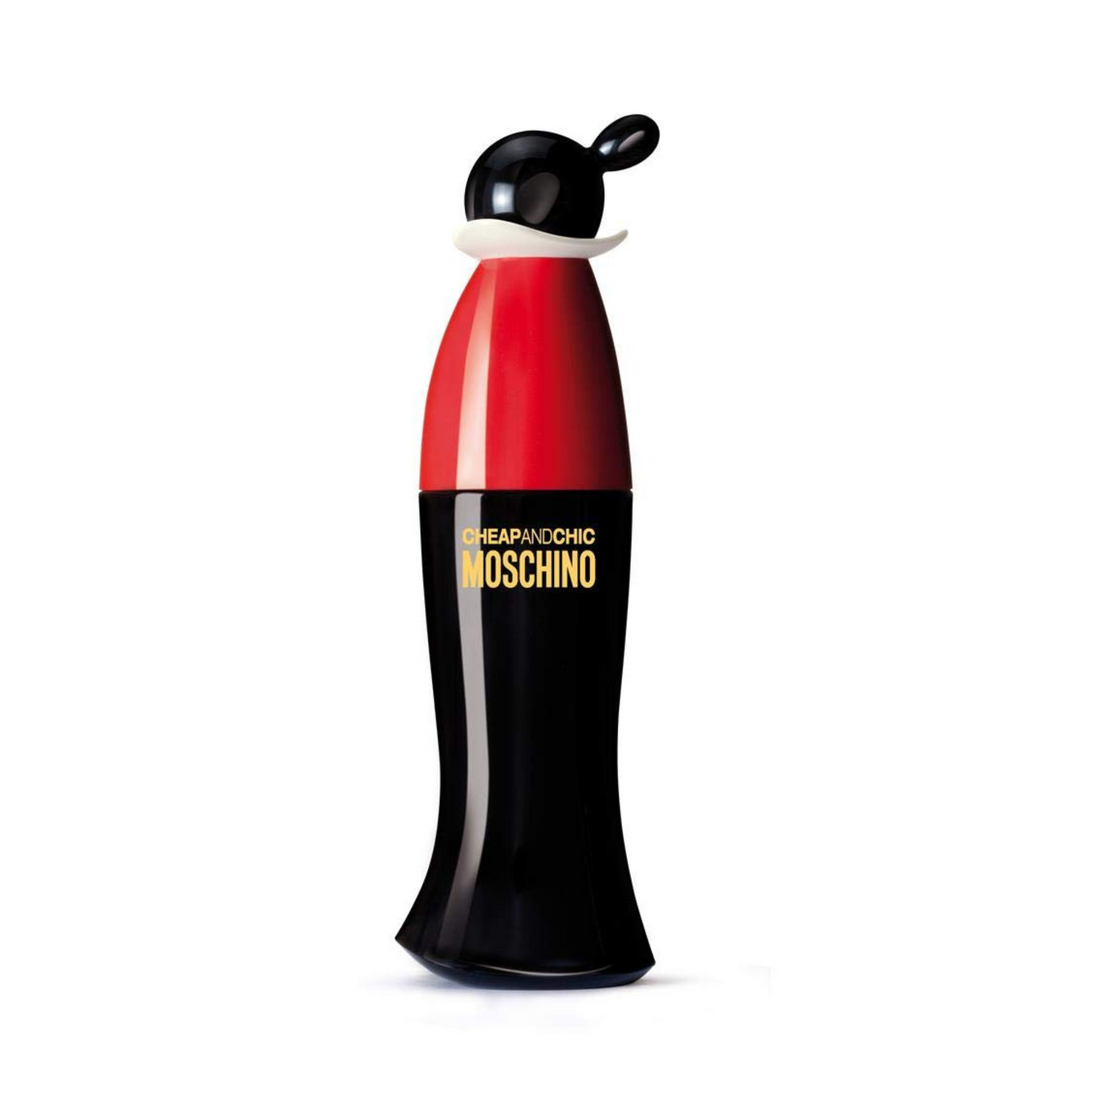 Moschino Cheap And Chic Edt Women